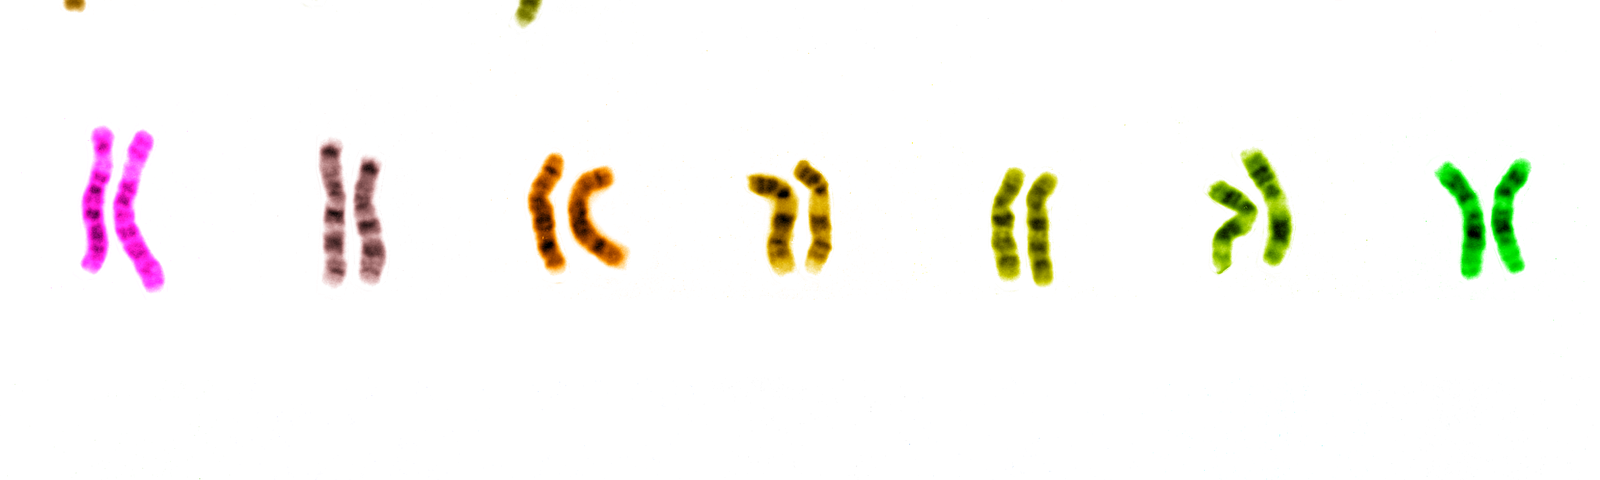 IMAGE: Human chromosomes, colored by UCSC browser default colors